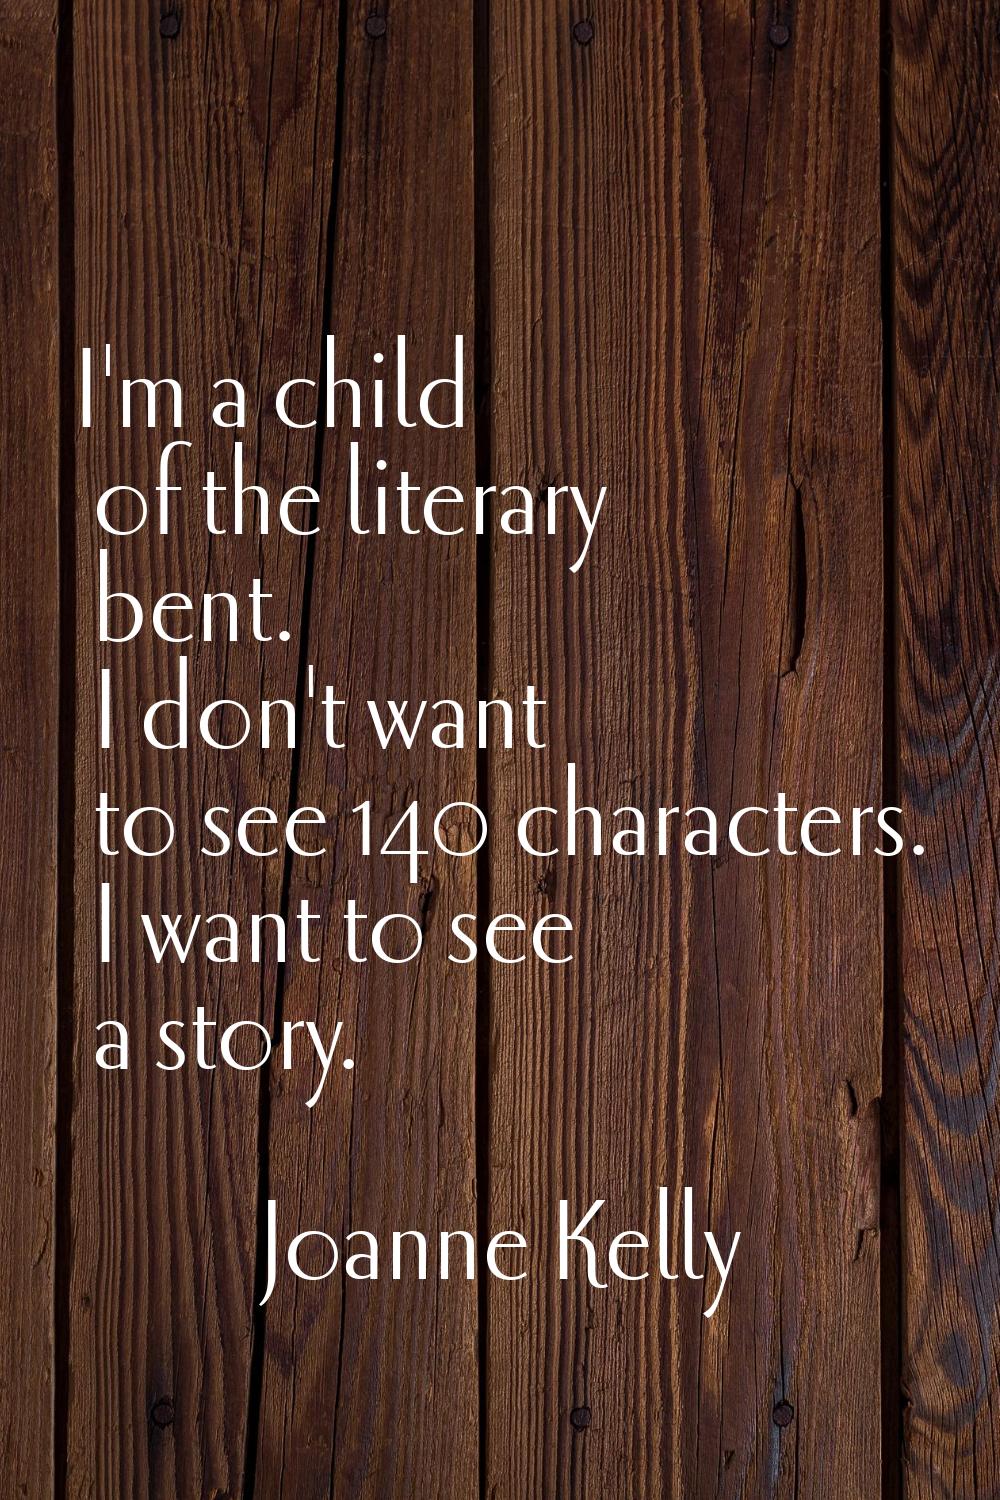 I'm a child of the literary bent. I don't want to see 140 characters. I want to see a story.